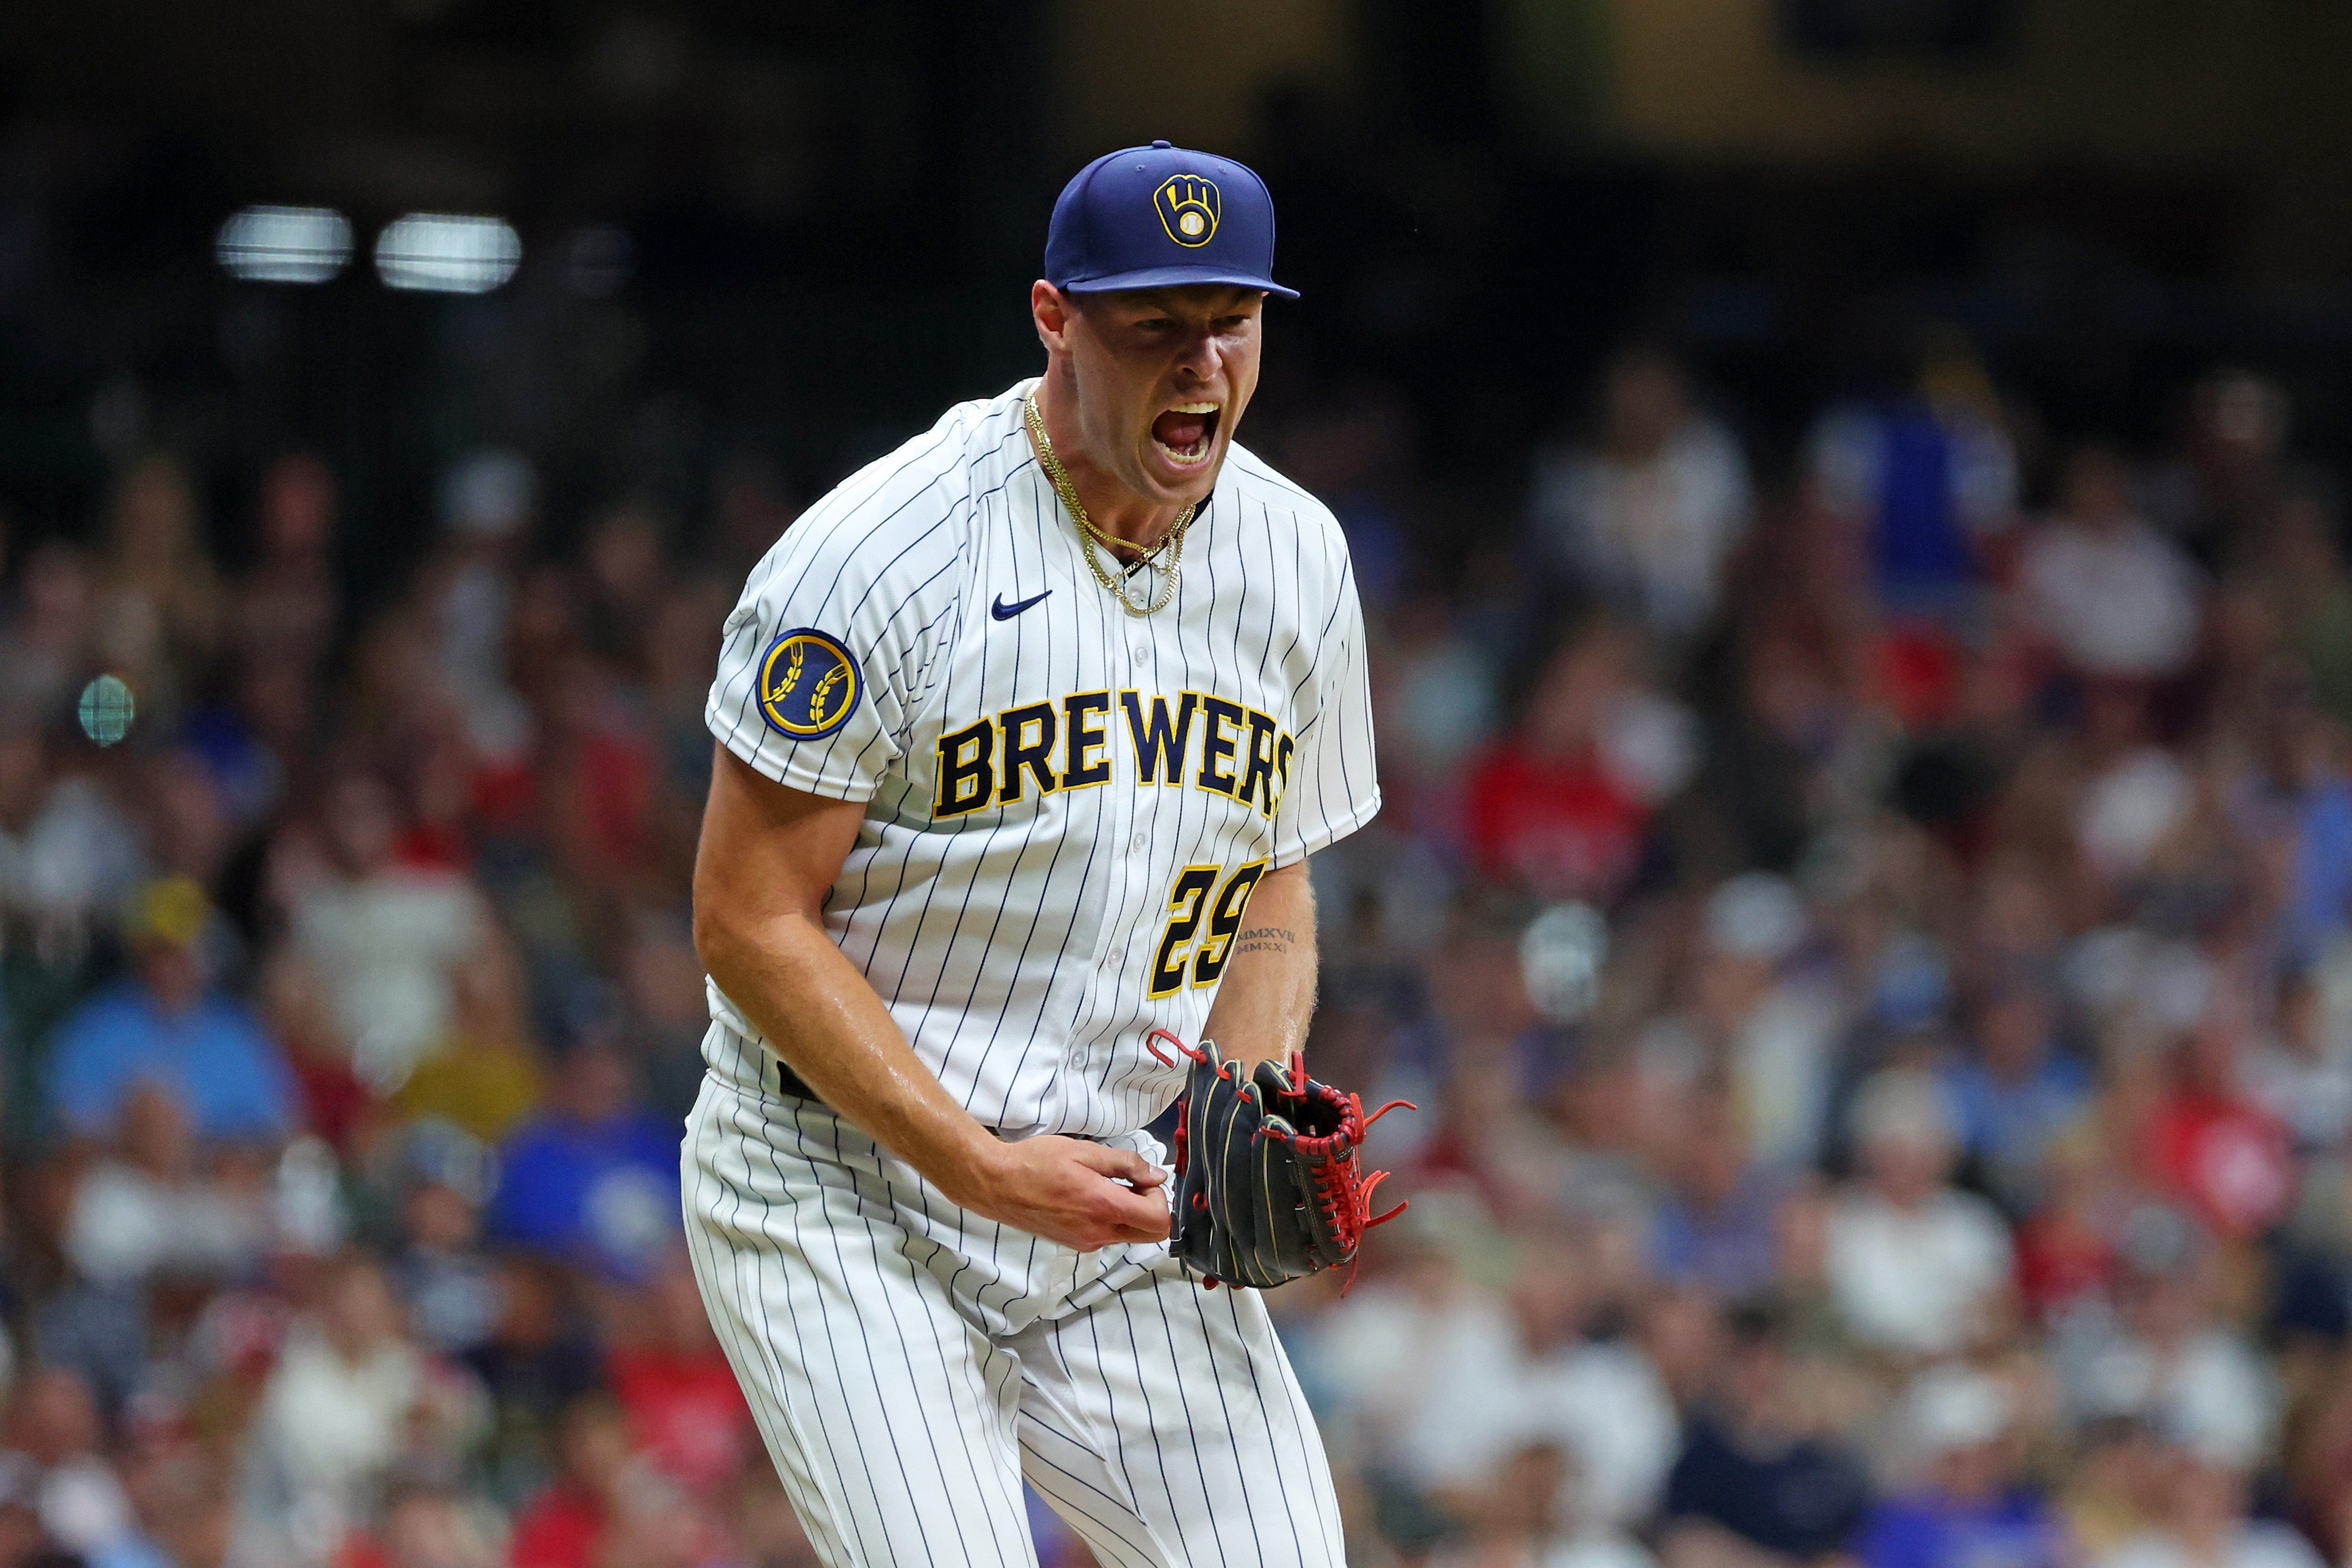 Get to know Q&A with Brewers reliever Trevor Megill: On Clifford the Big Red Dog, water polo and Metallica